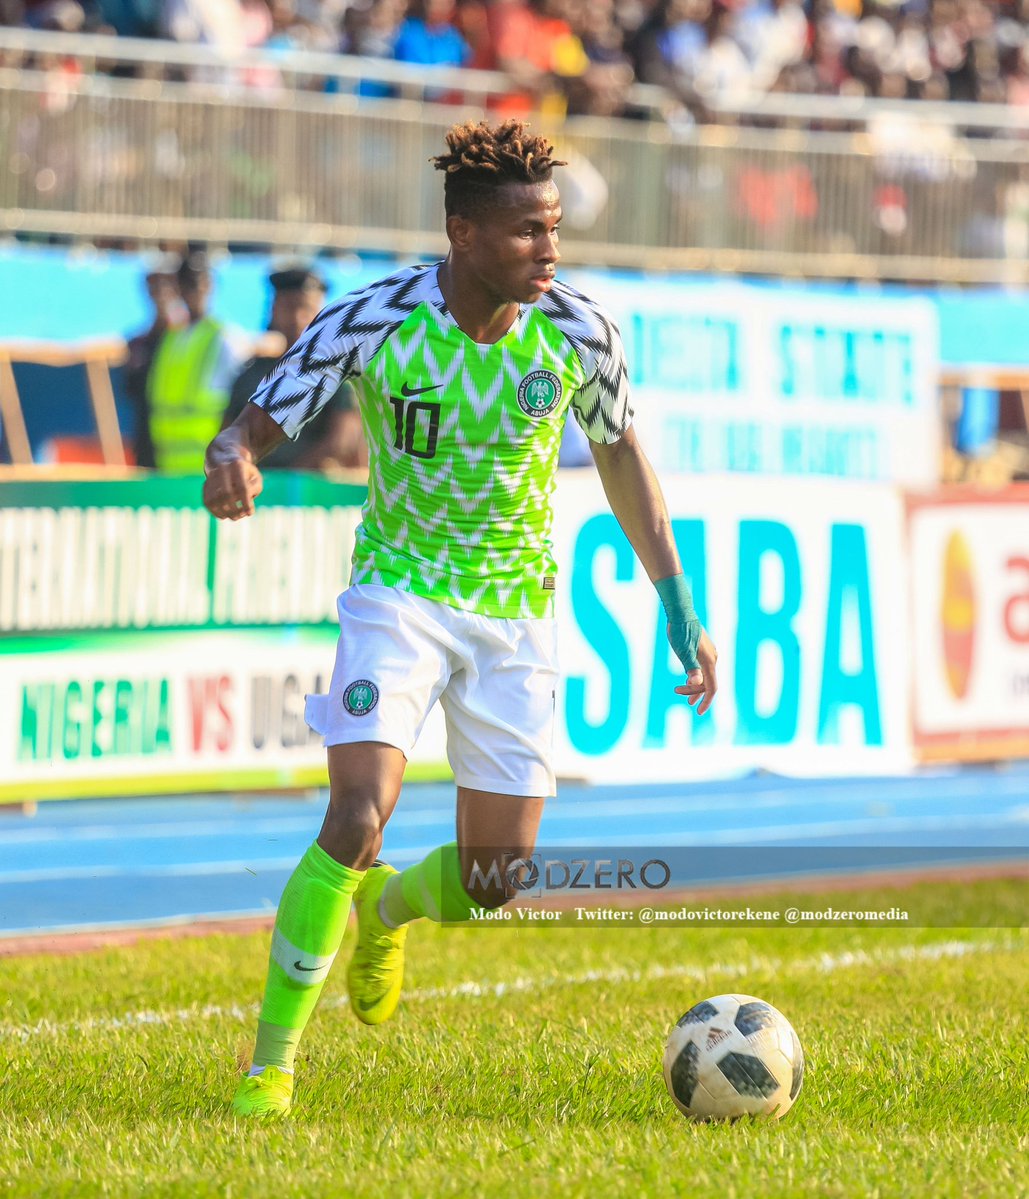 1994 AFCON-Winning Midfielder Backs Chukwueze For Super Eagles Duties Over U20 World Cup Place